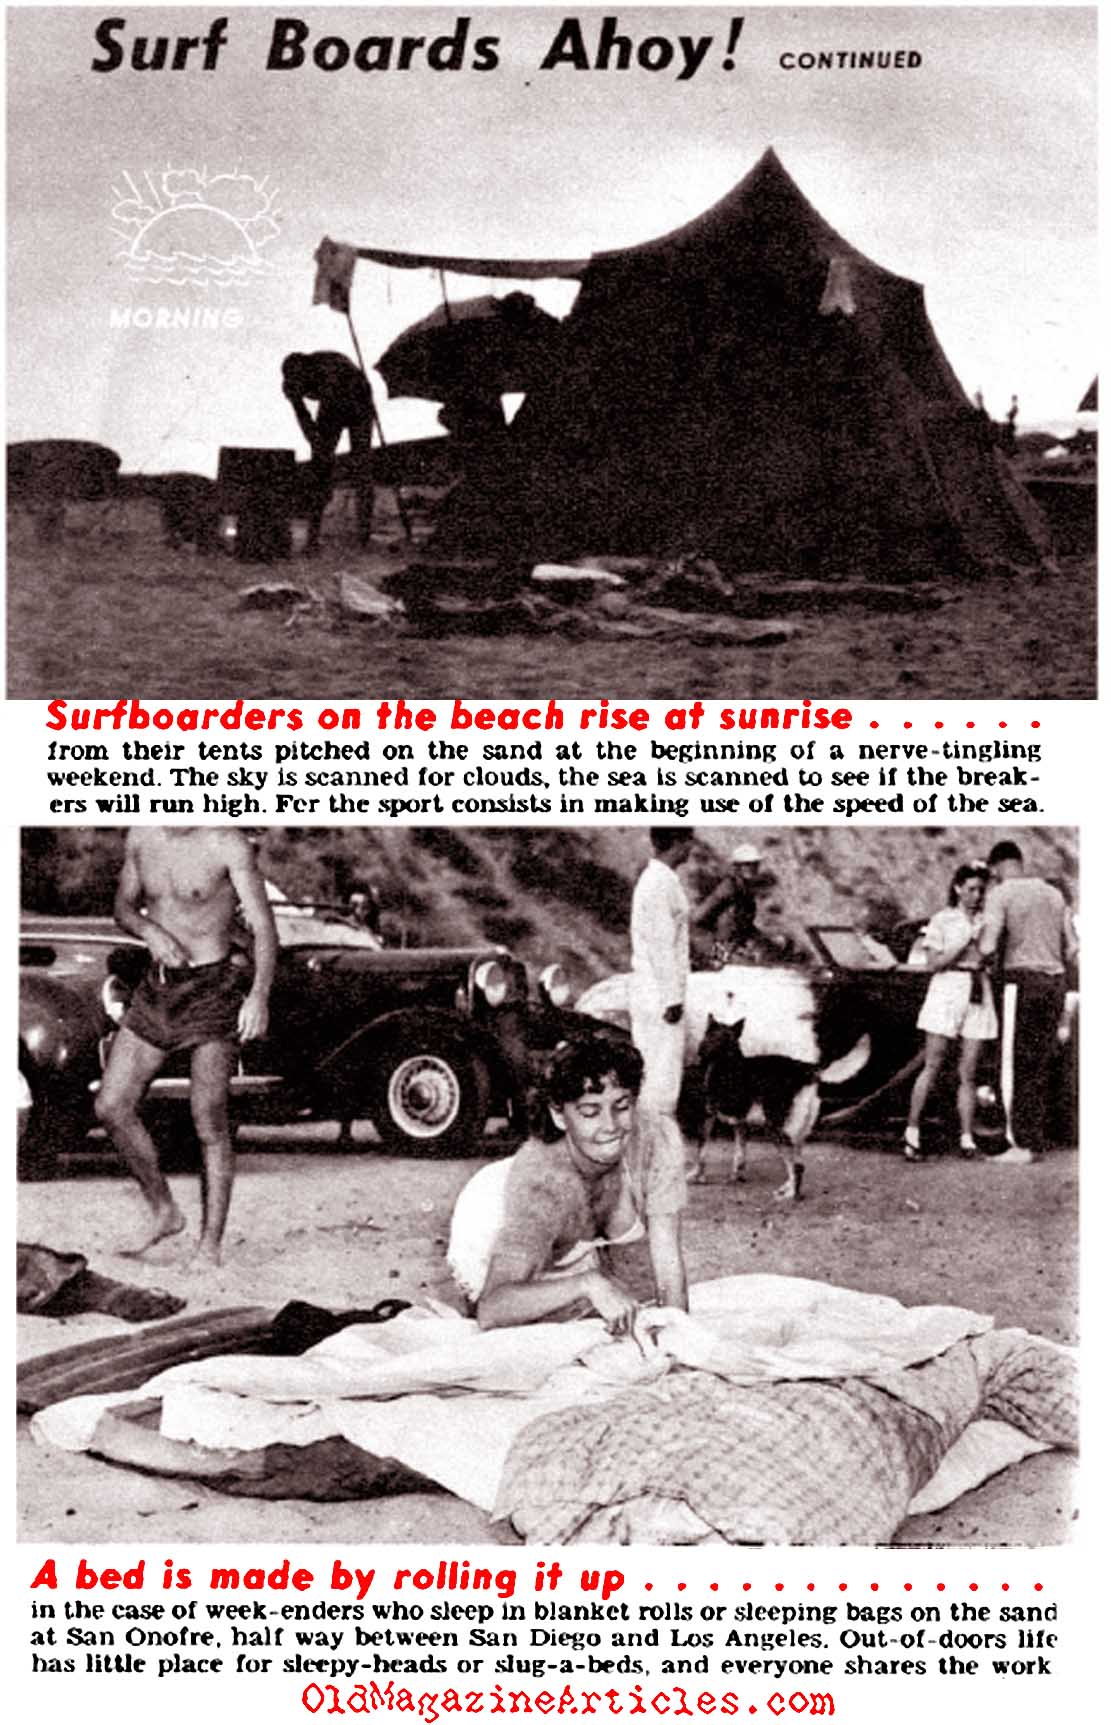 Surfing: The New Thing (Click Magazine, 1941)